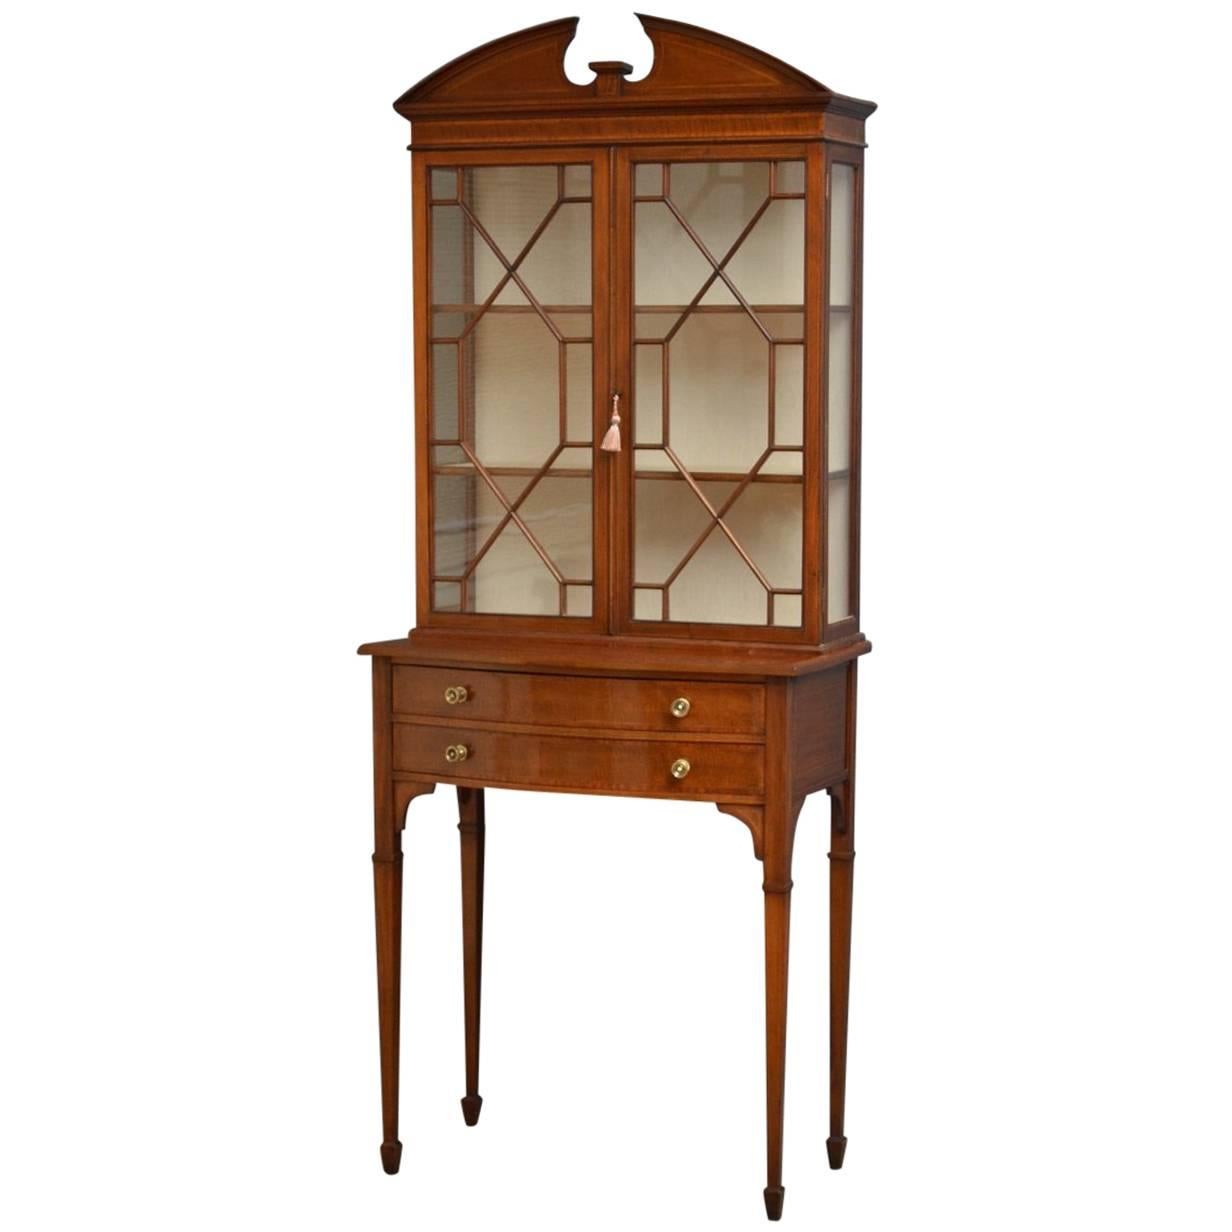 Excellent Edwardian Display Cabinet by Maple & Co